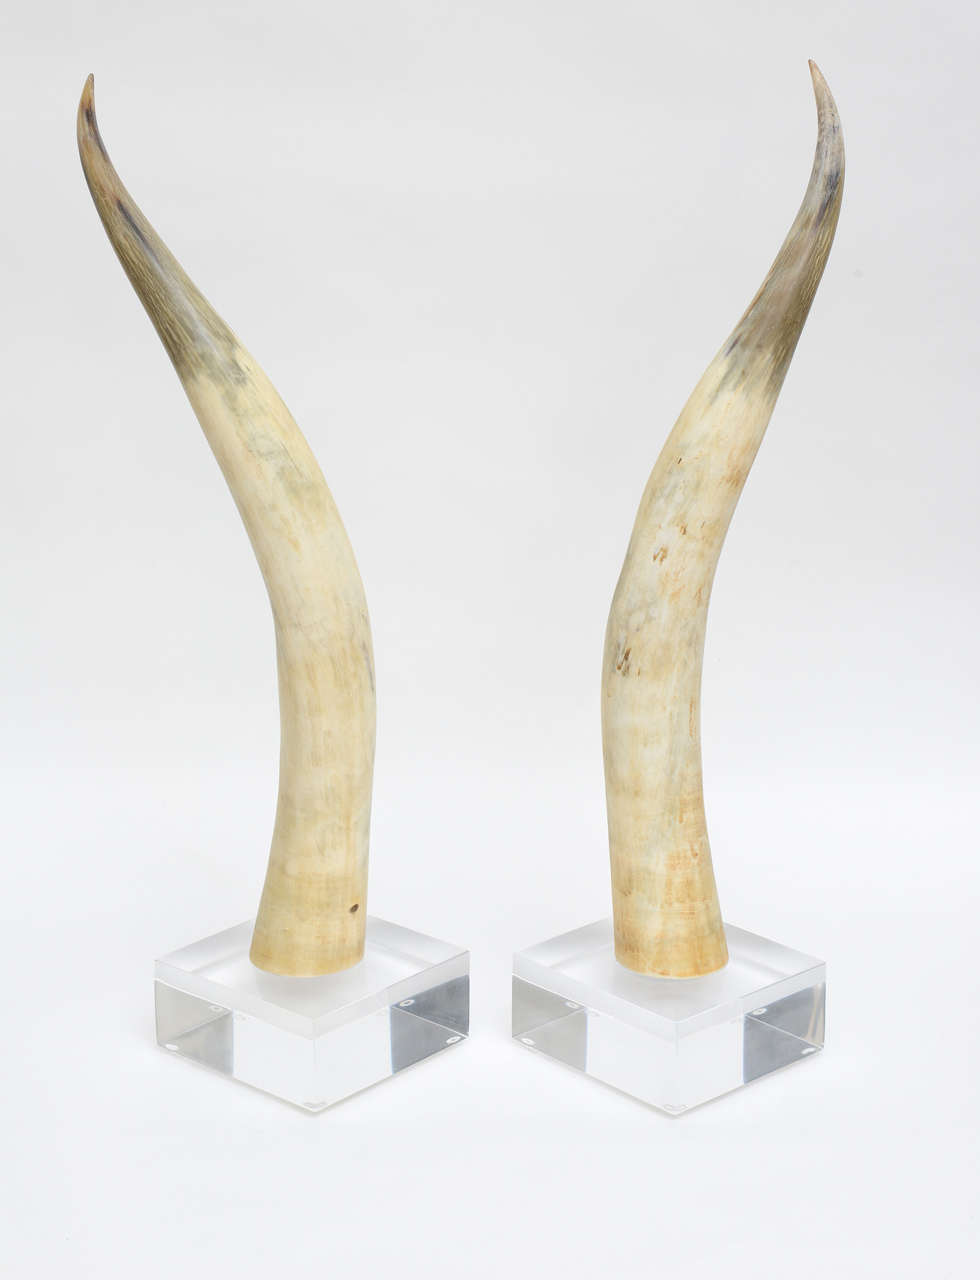 Pair of tall large, oversized white and brown horns on square Lucite bases. Can be used center accent display or bookends.